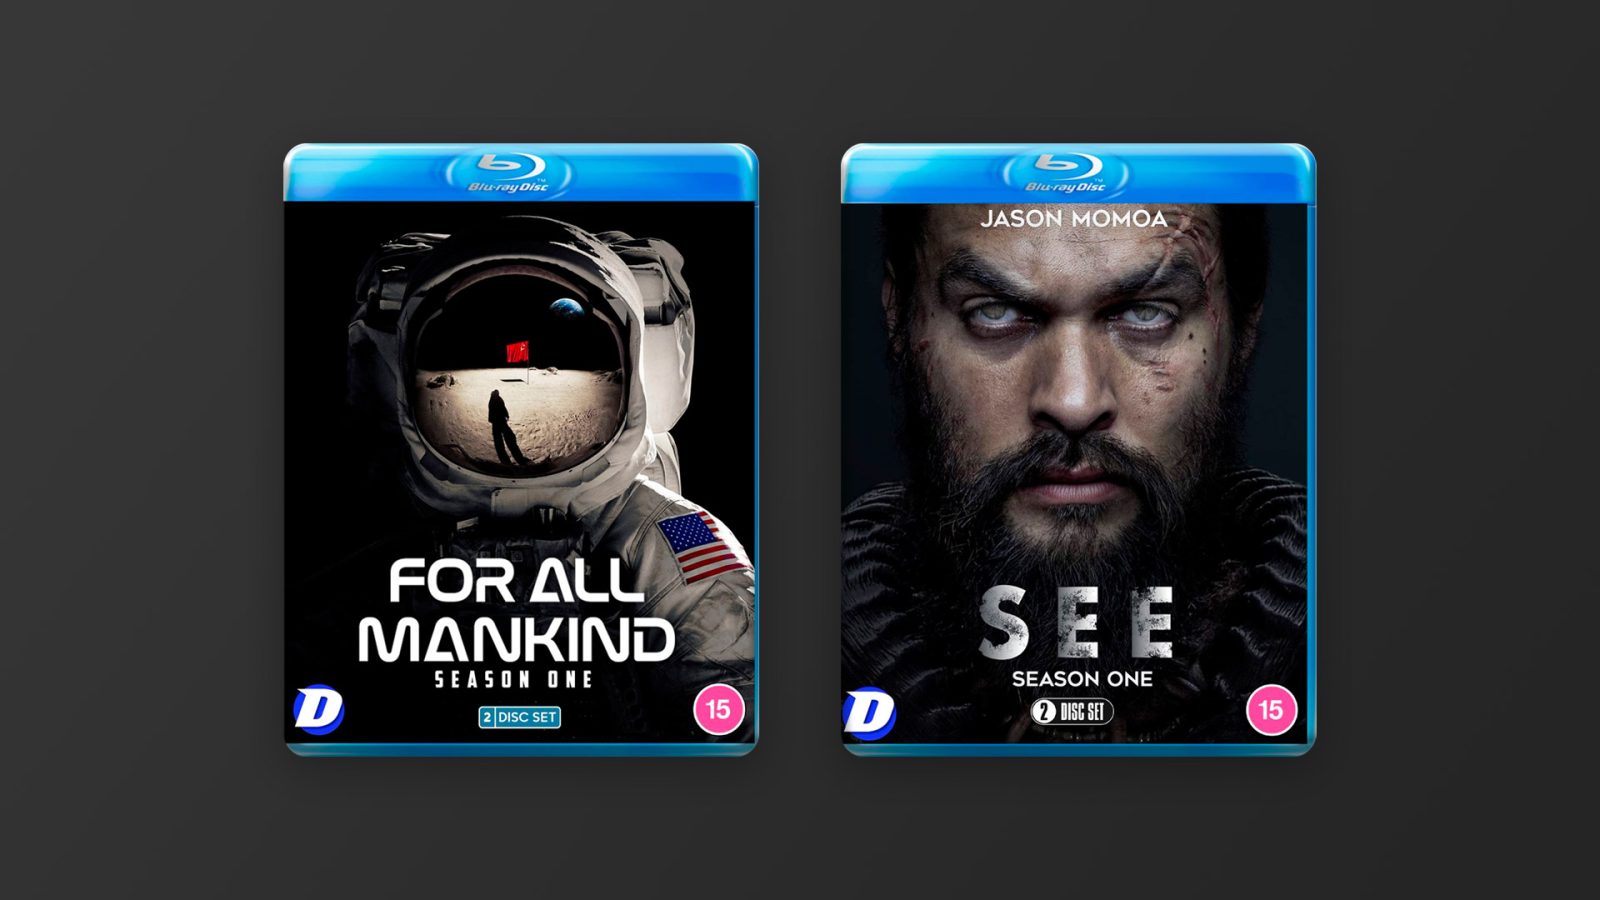 SEE, For All Mankind and other Apple TV+ shows to be available on Blu-Ray later this year